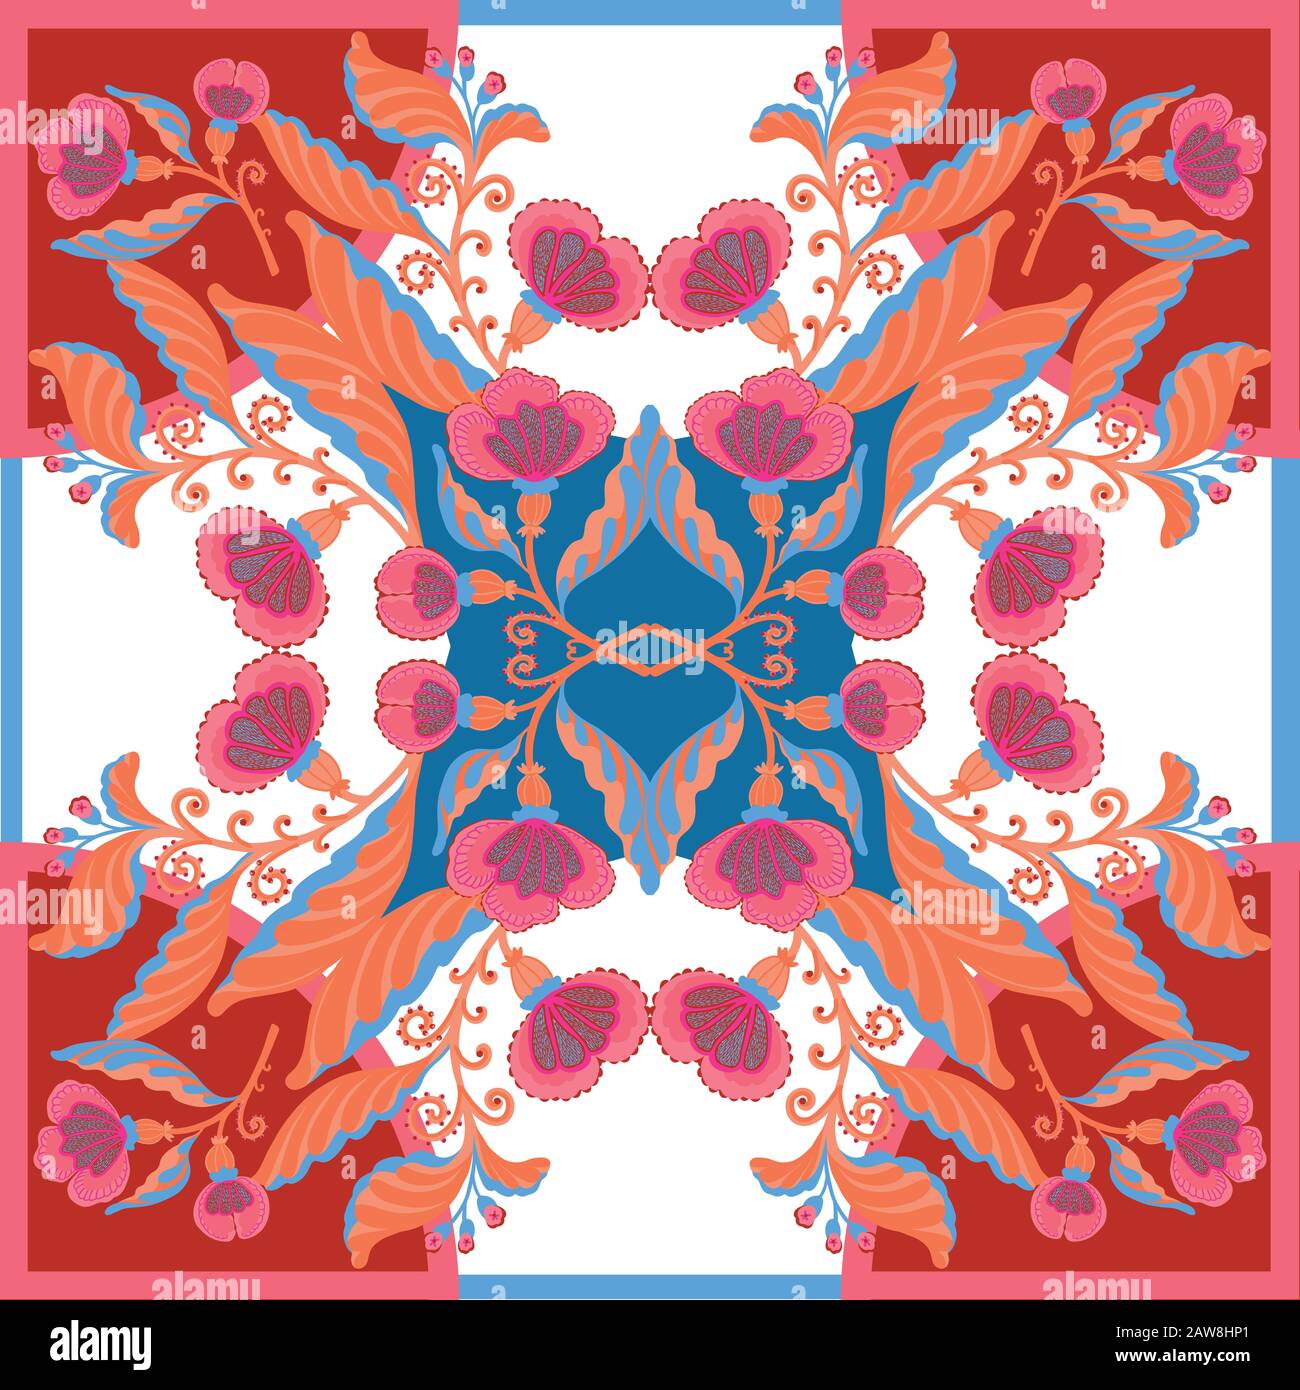 Silk scarf with abstract flowers vector pattern with hand drawn floral elements. Stock Vector